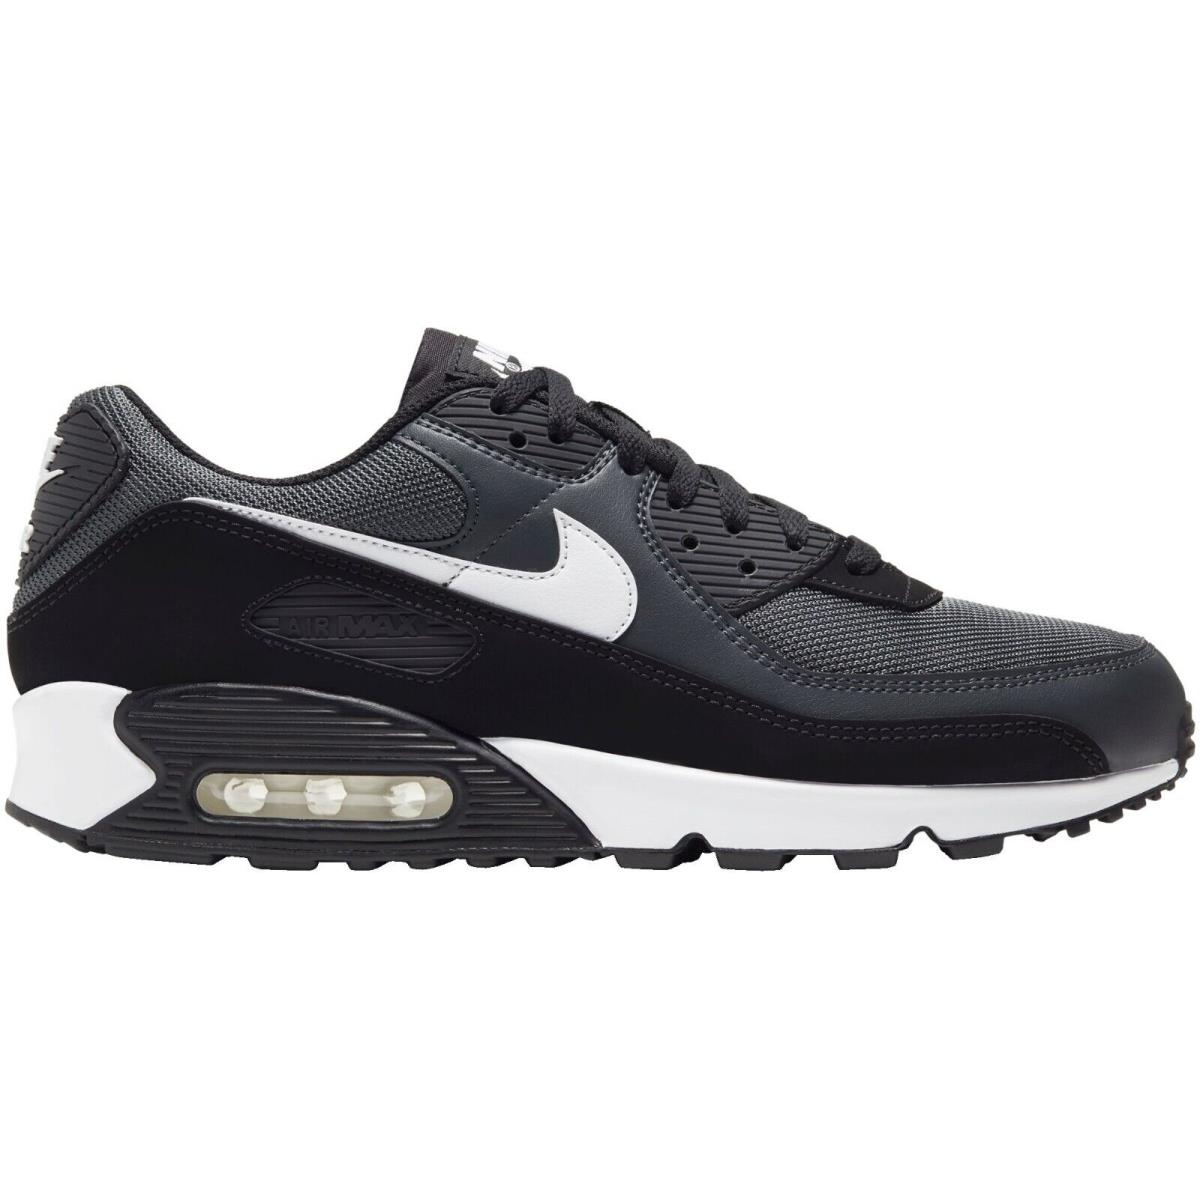 Nike Air Max 90 Men`s Casual Shoes All Colors US Sizes 7-14 Bestseller Iron Grey/Dark Smoke Grey/Black/White